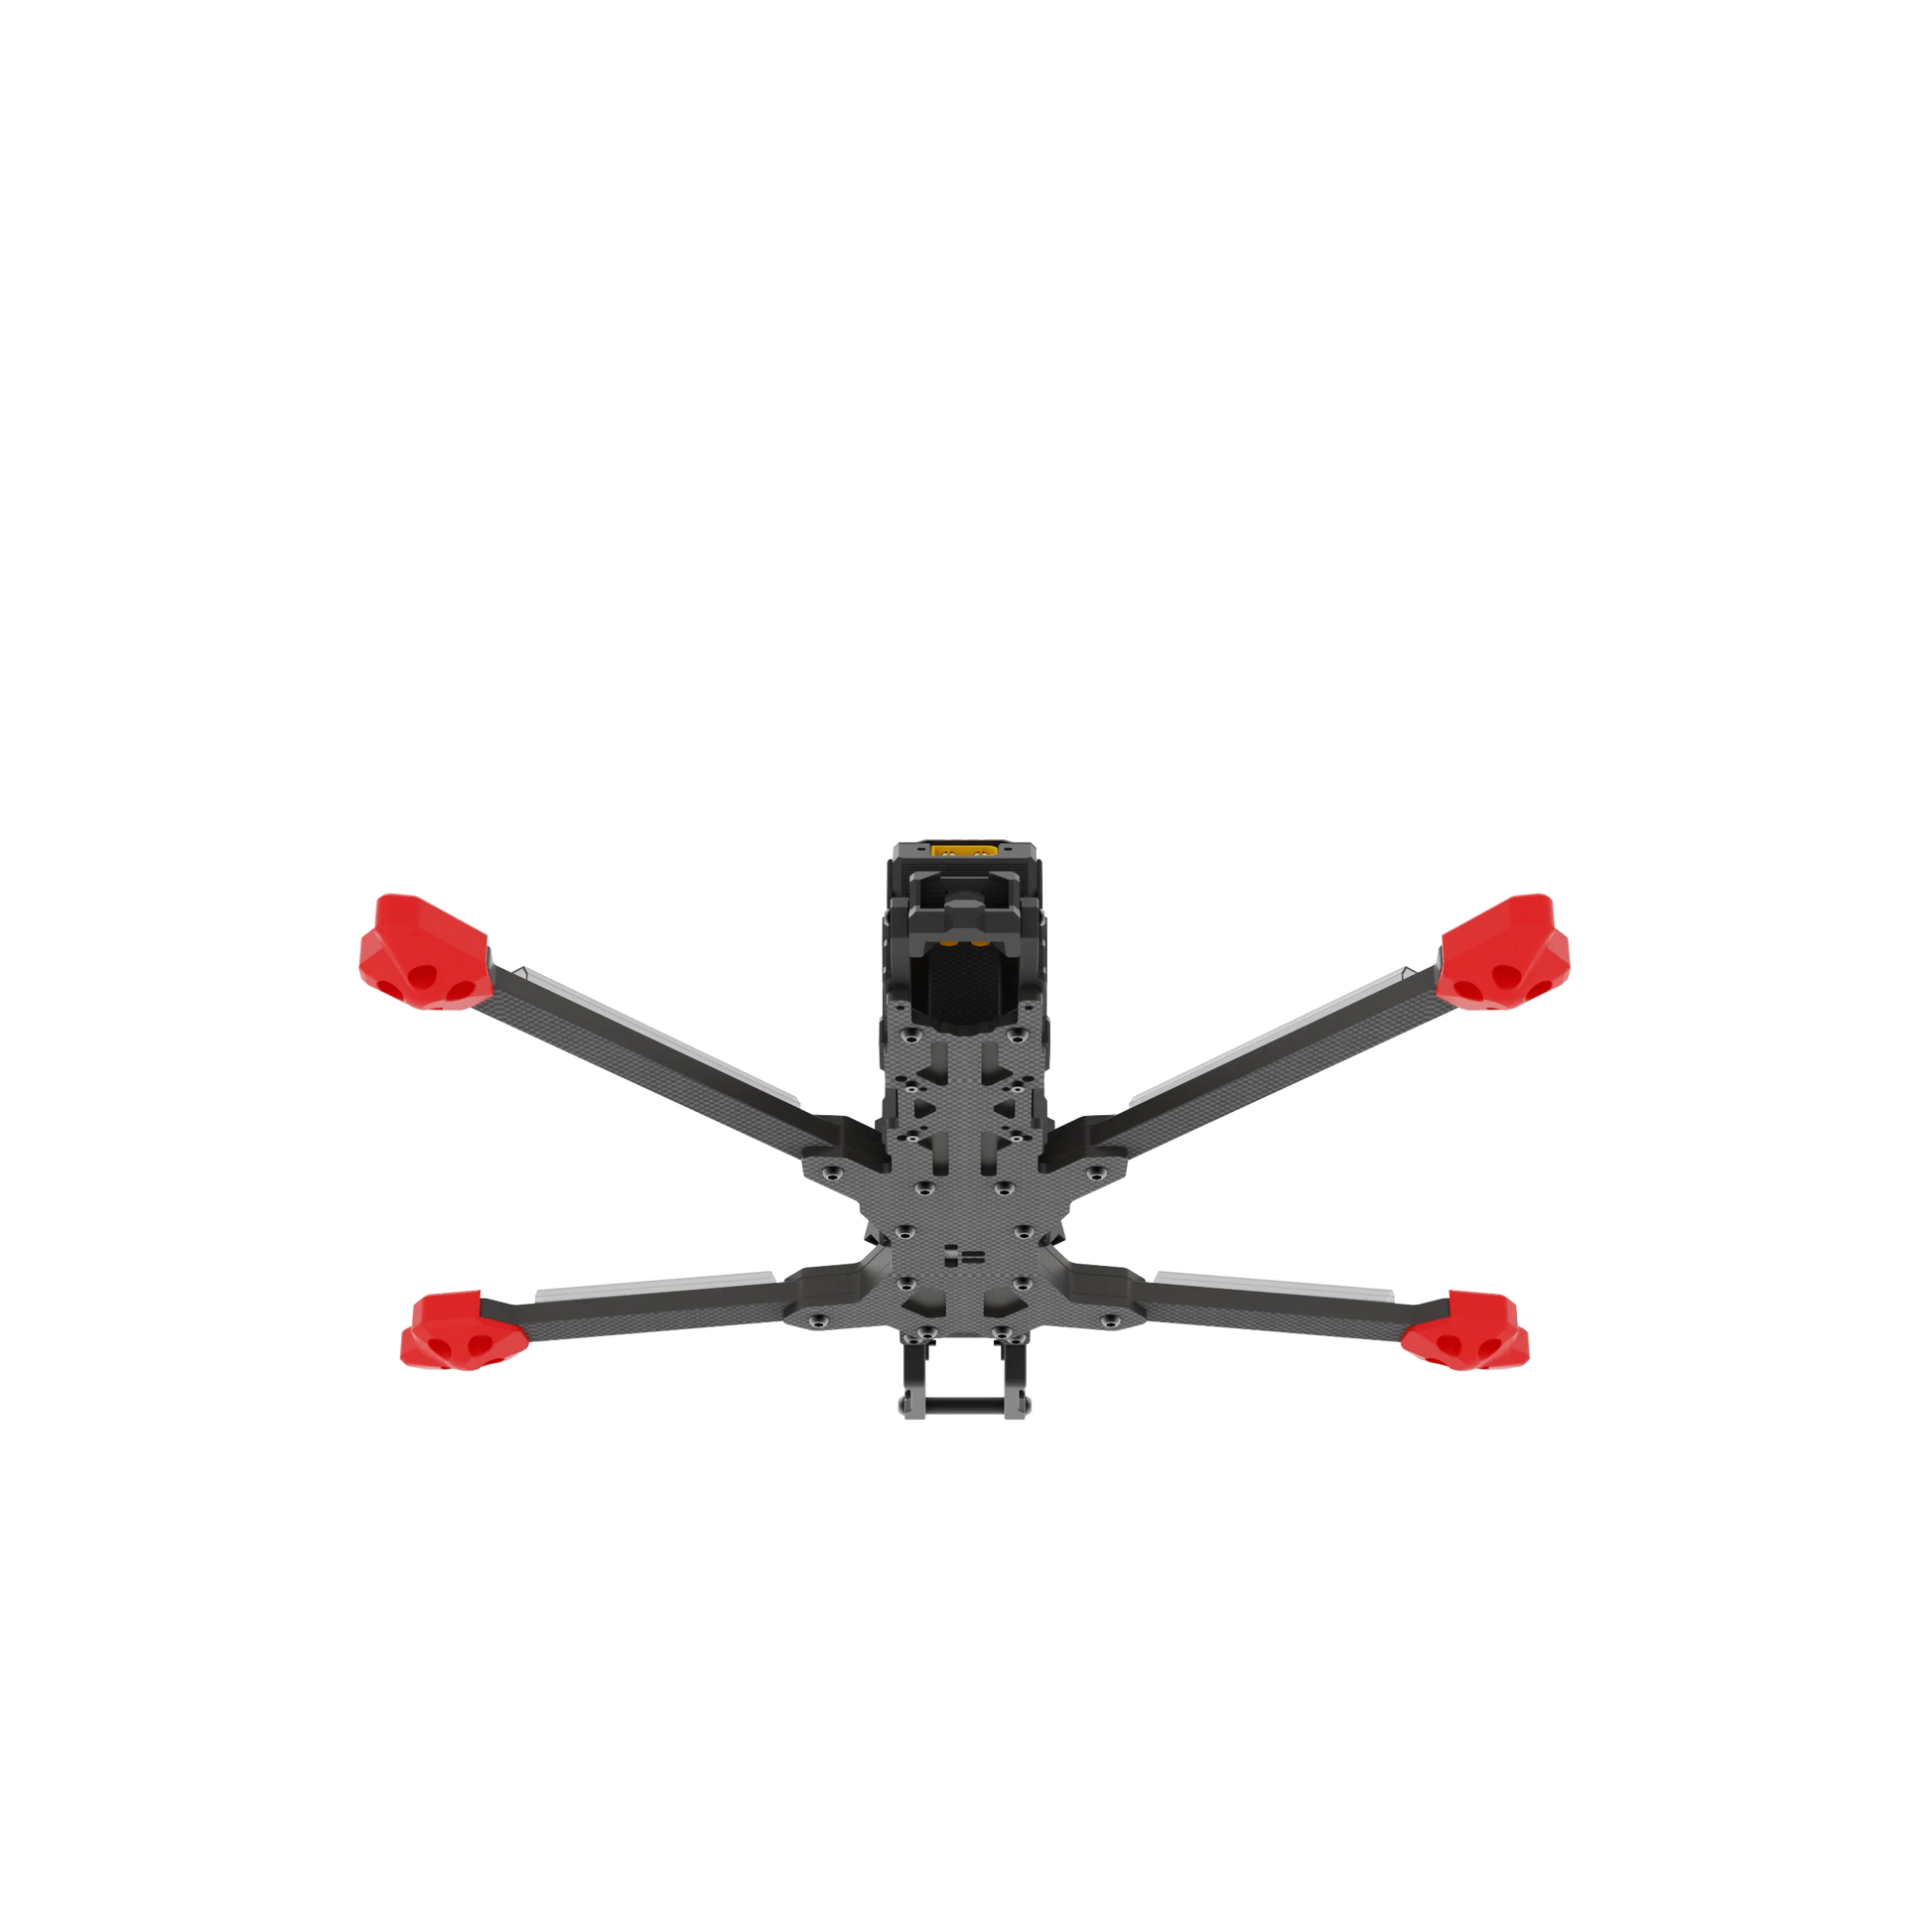 iFlight Chimera7 Pro V2 Frame Kit with 6mm arm for FPV Parts